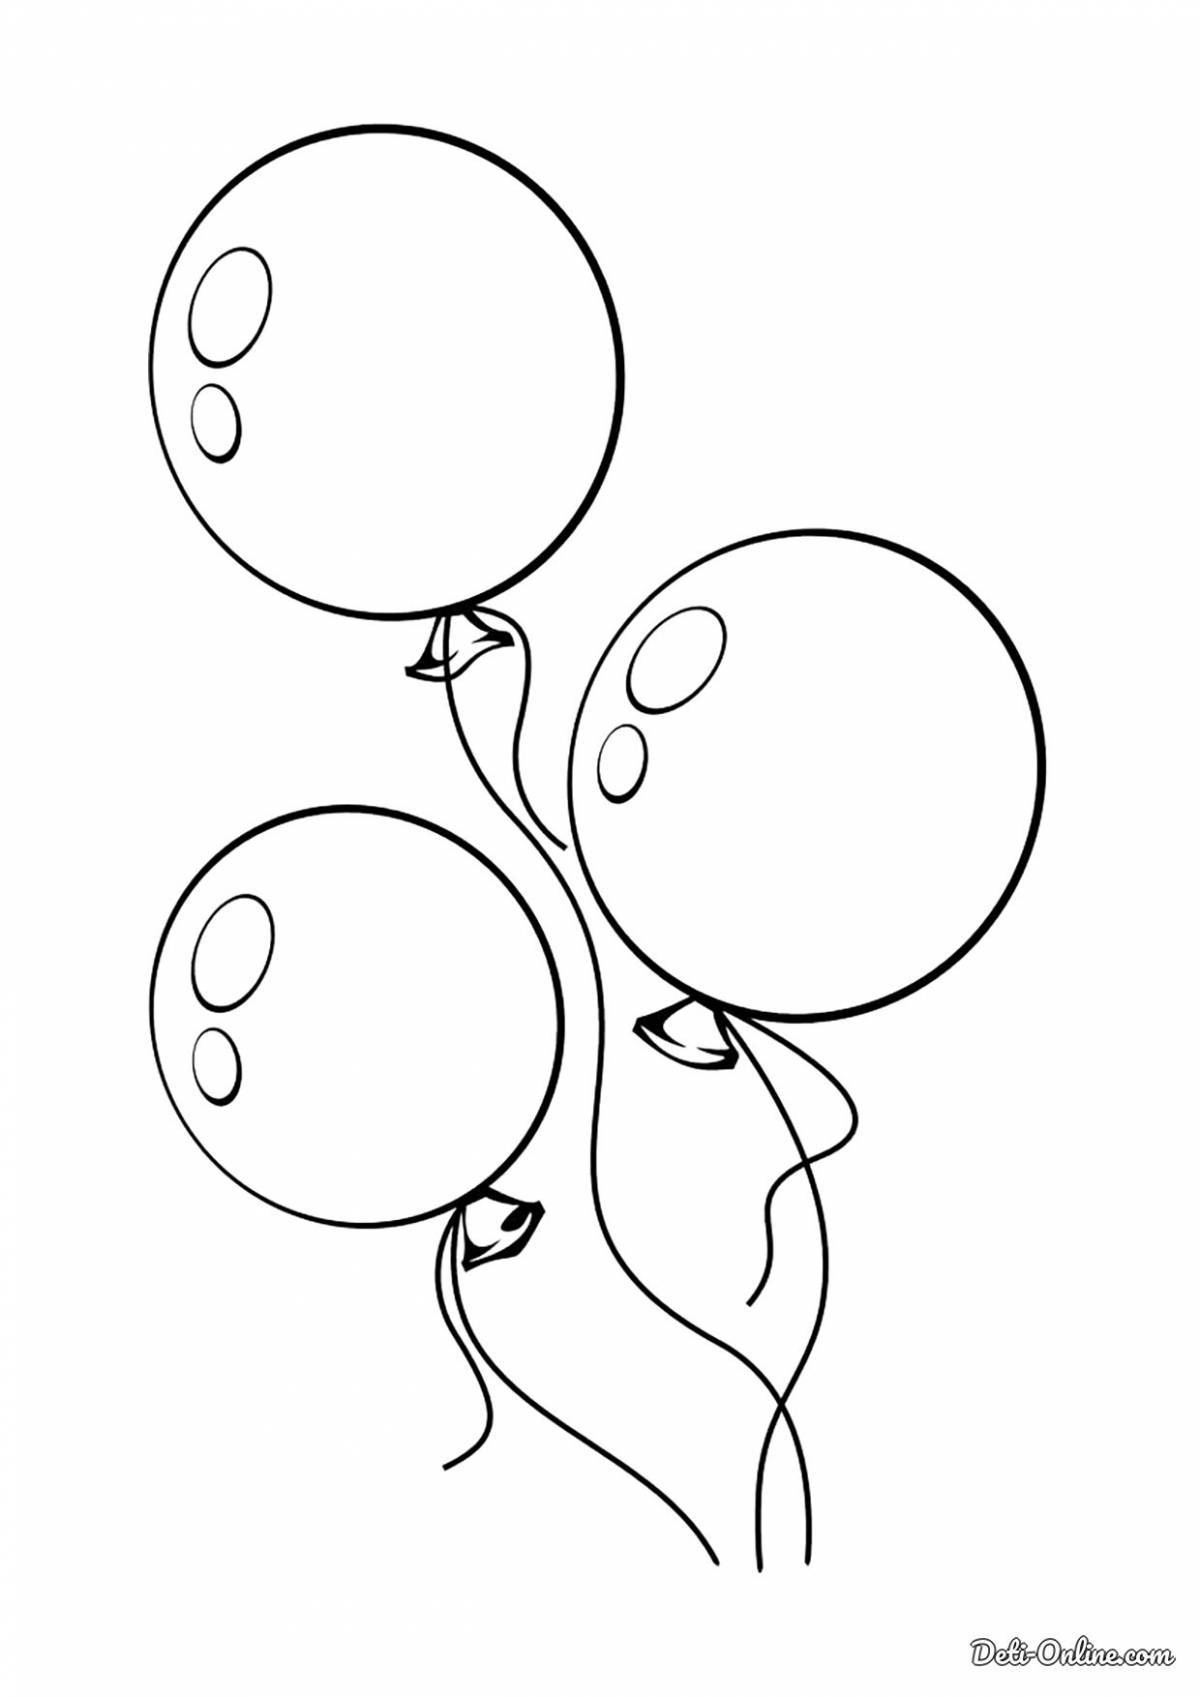 Coloring pages jubilant balloons for kids